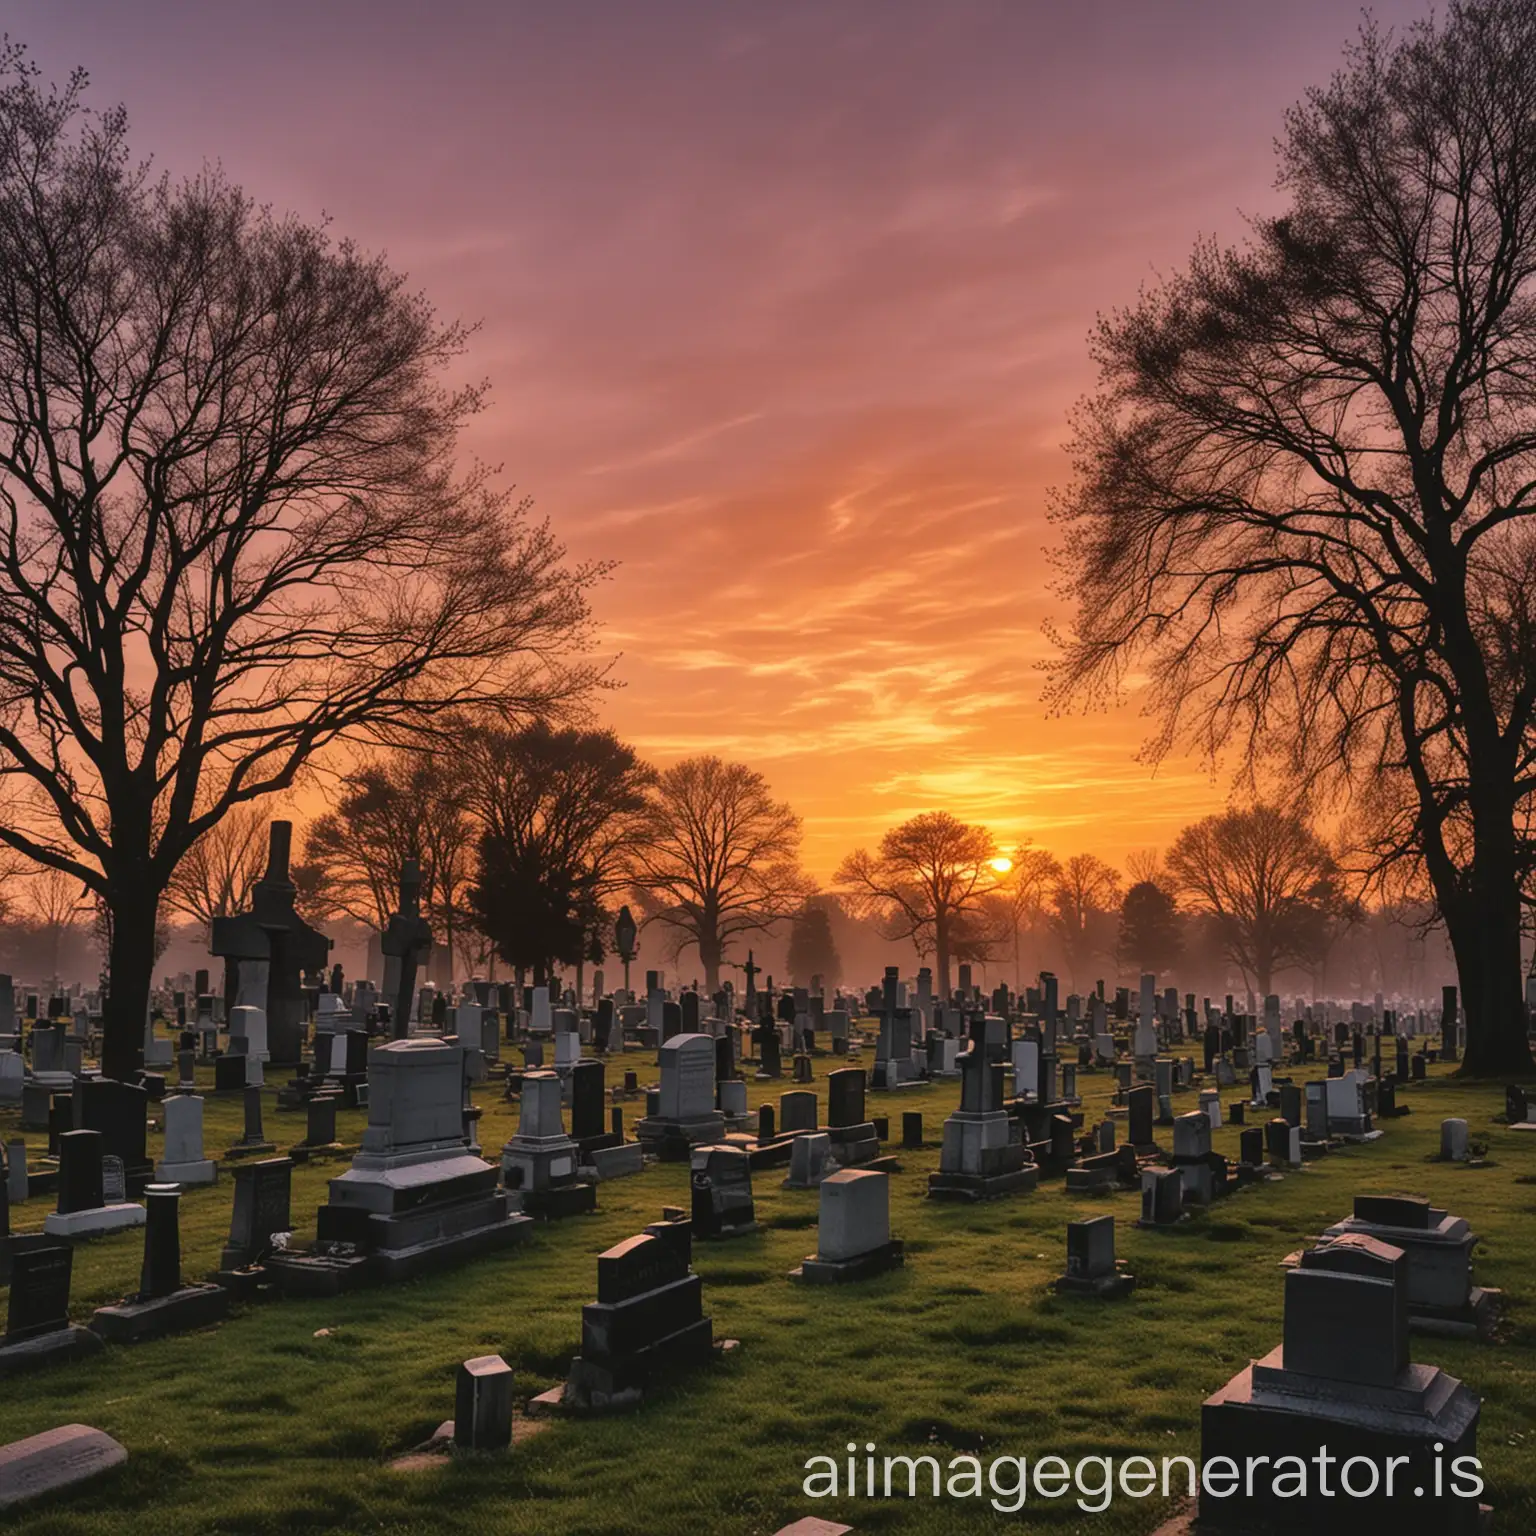 Peaceful-Sunset-Over-Cemetery-Tranquil-Evening-Scene